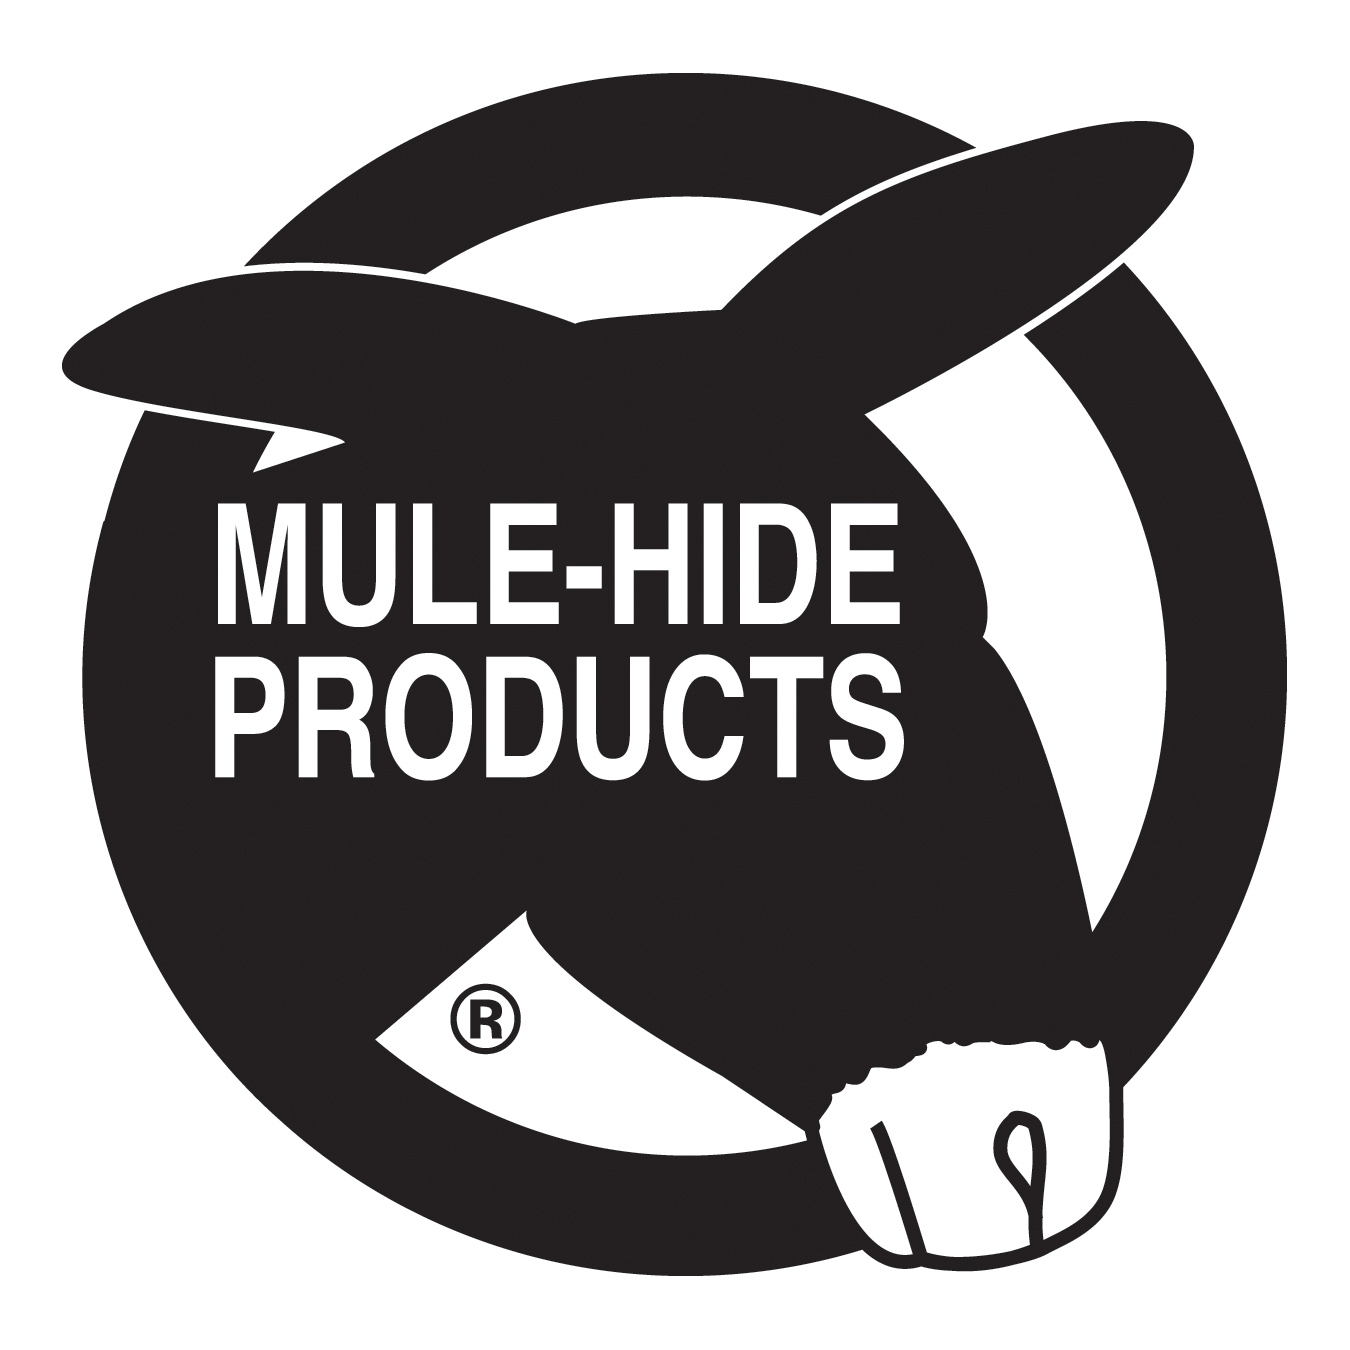 Mule-Hide Products Certification